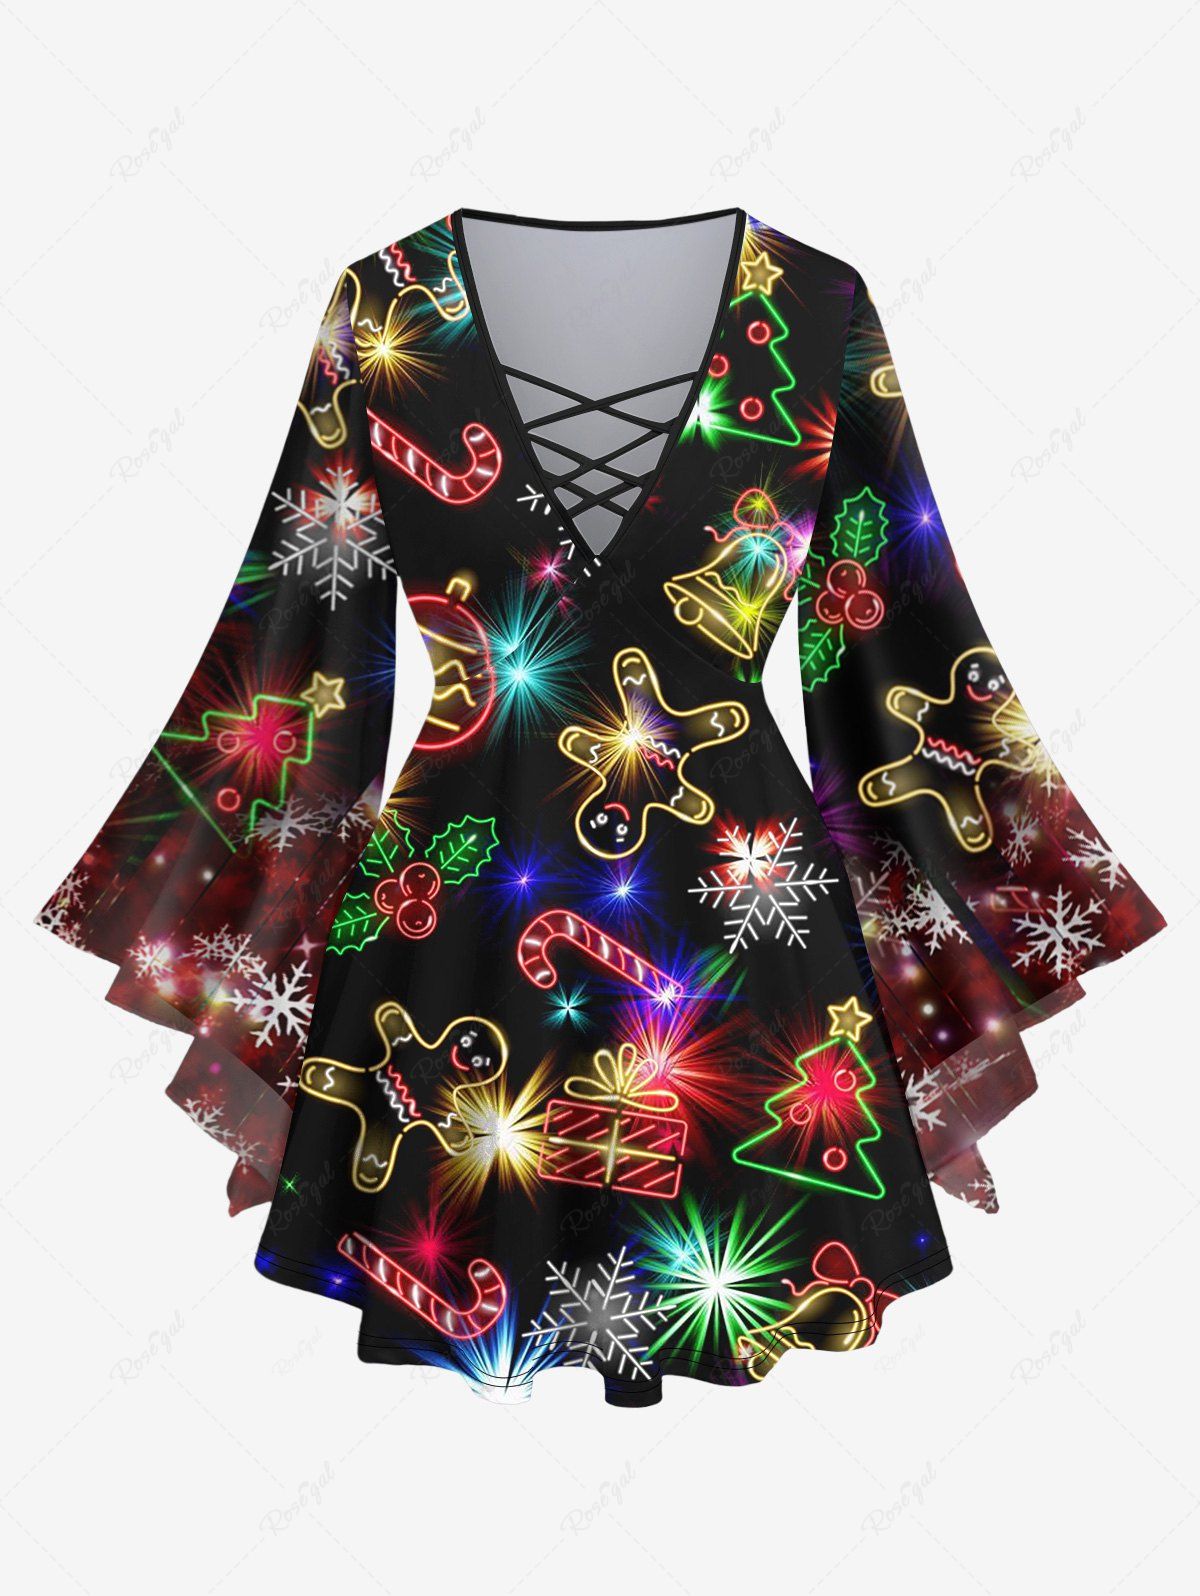 Unique Plus Size Glitter Sparkling Christmas Tree Light Ball Bell Snowflake Candy Gingerbread Print Flare Sleeves Lattice Ombre Top  